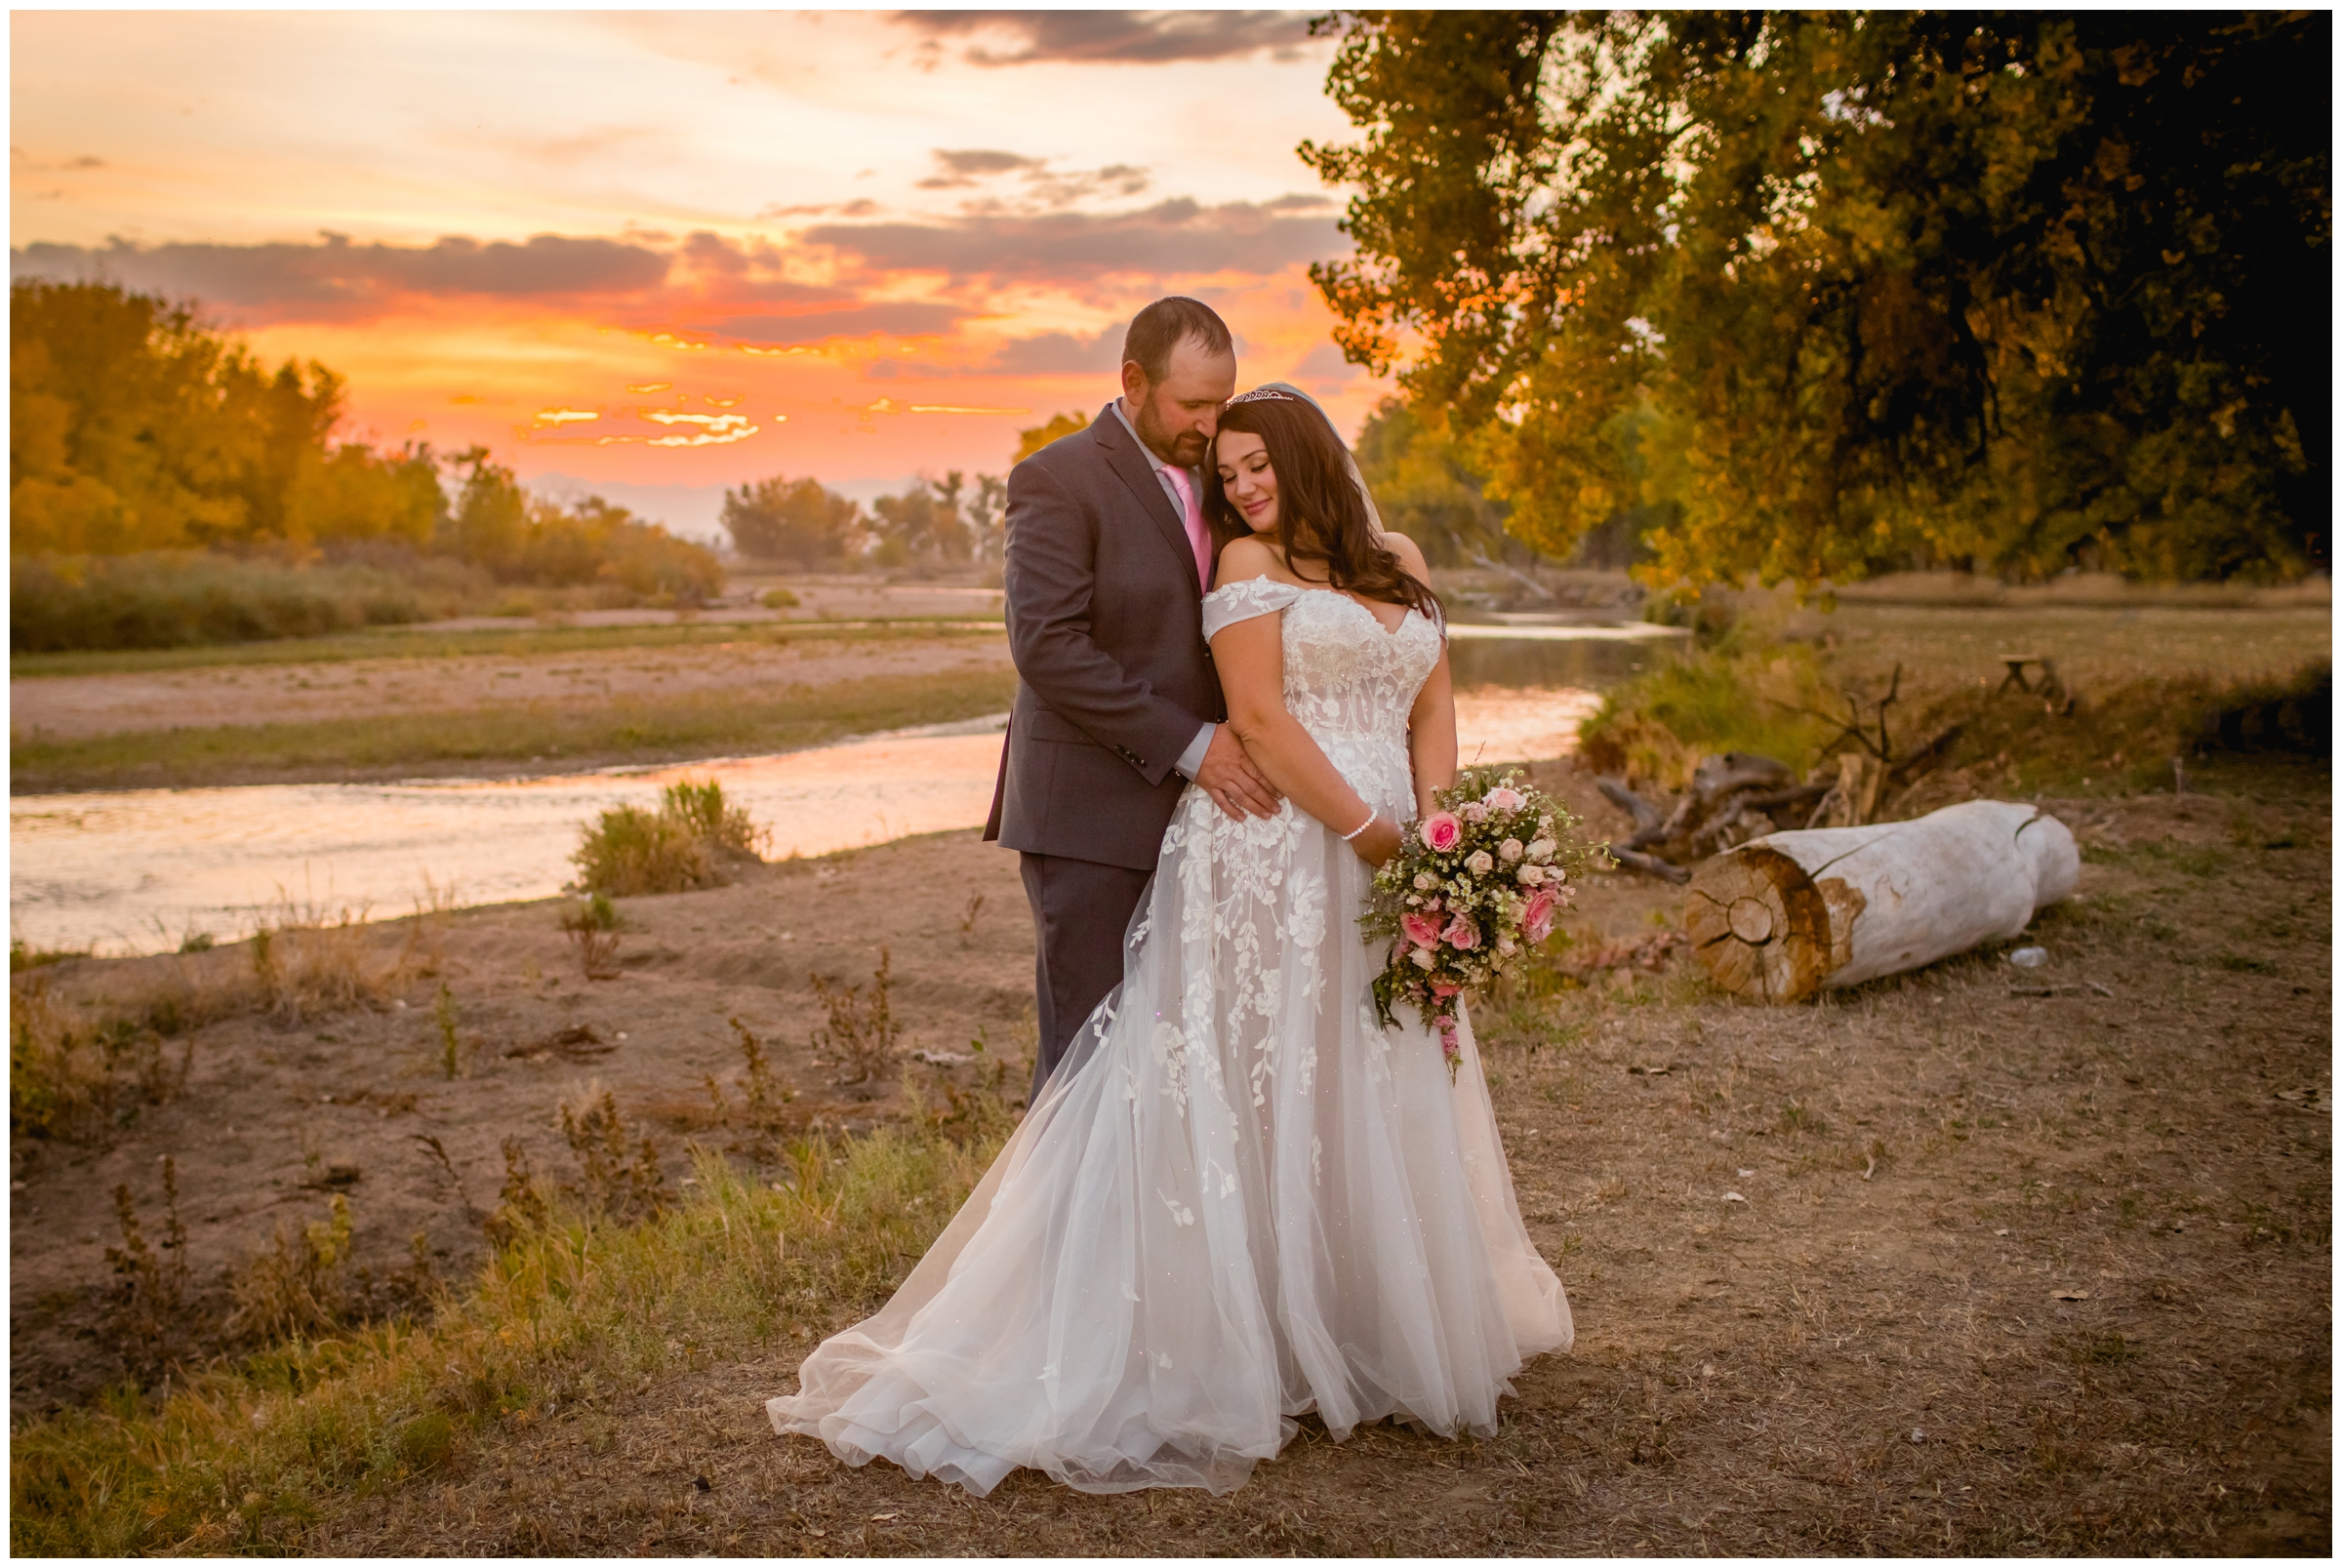 rustic Colorado wedding photography at sunset by Platteville CO photographer Plum Pretty Photography